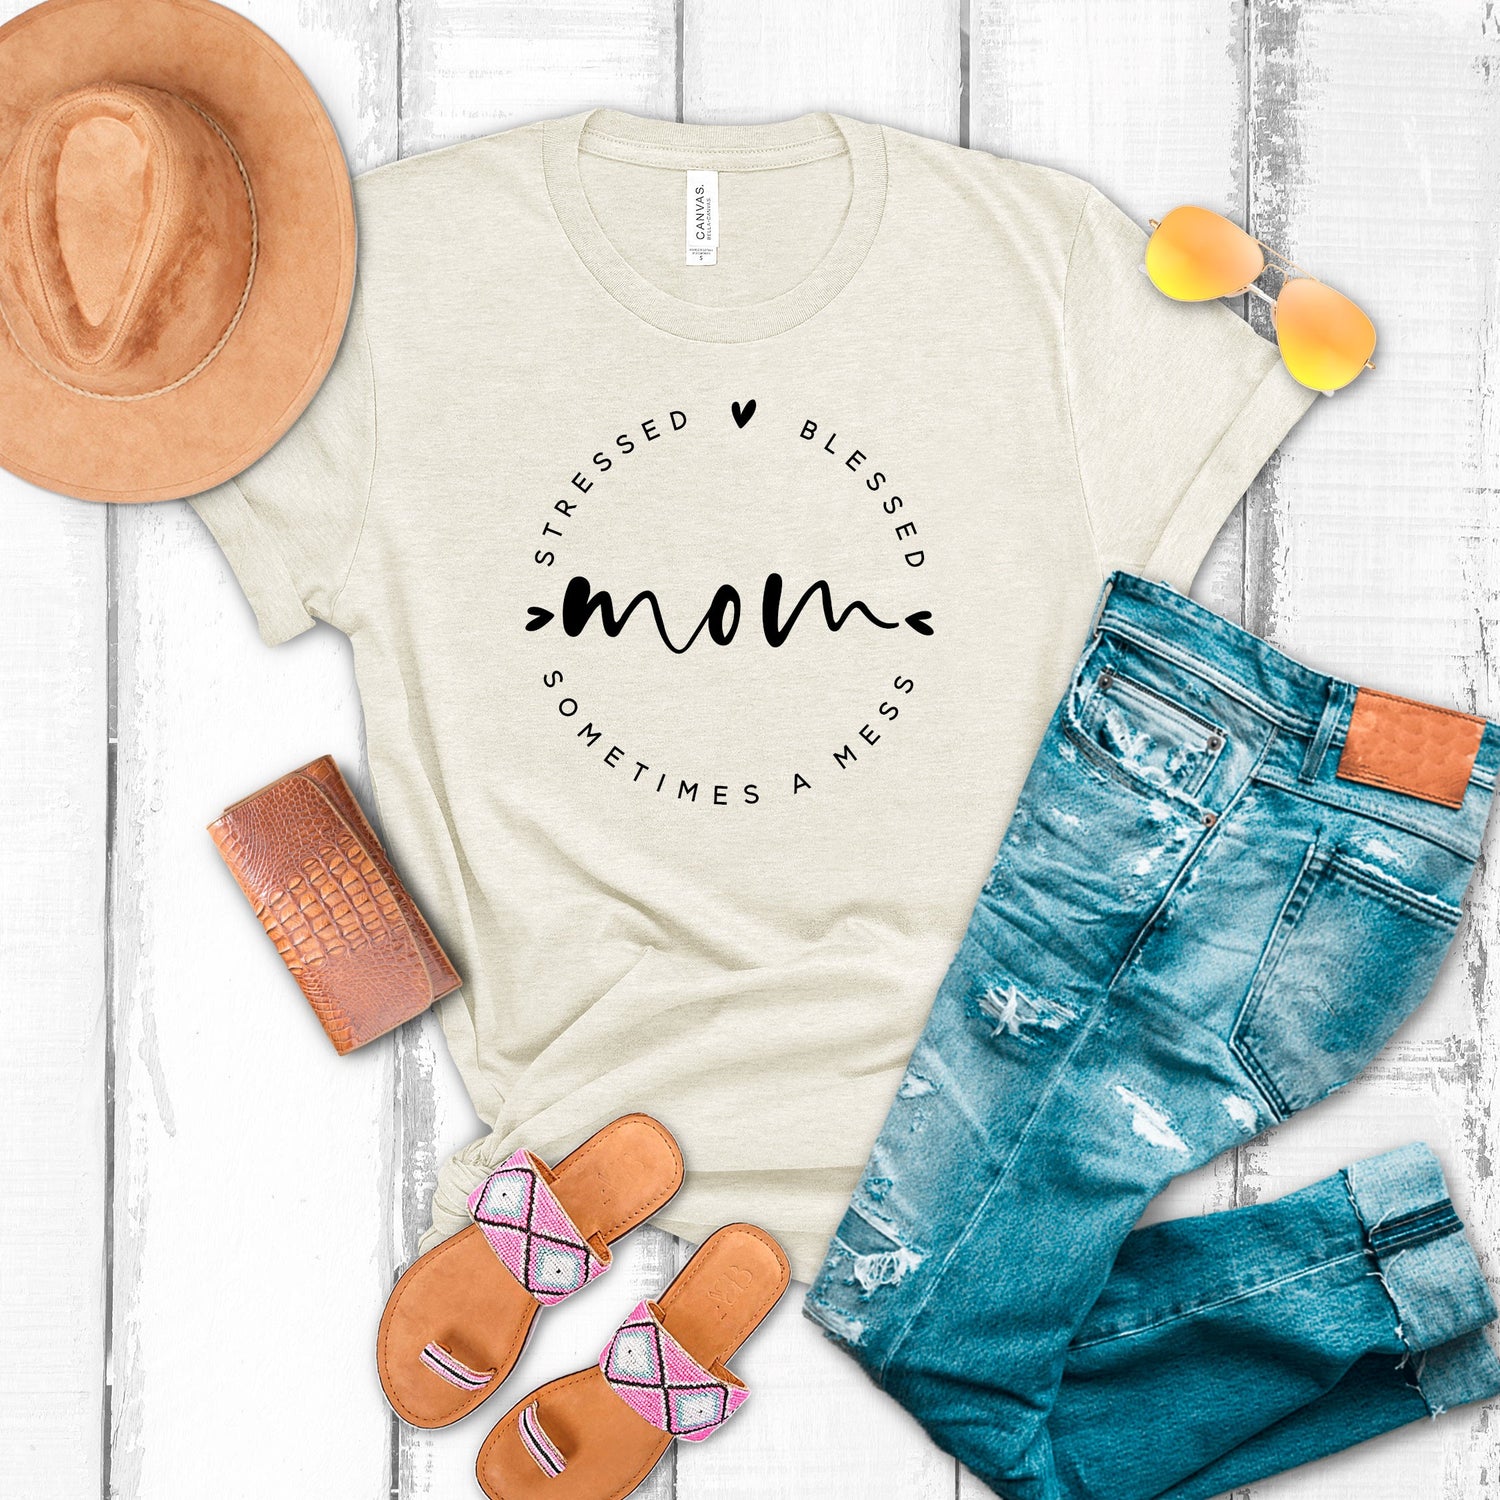 Mother's Day T-shirts